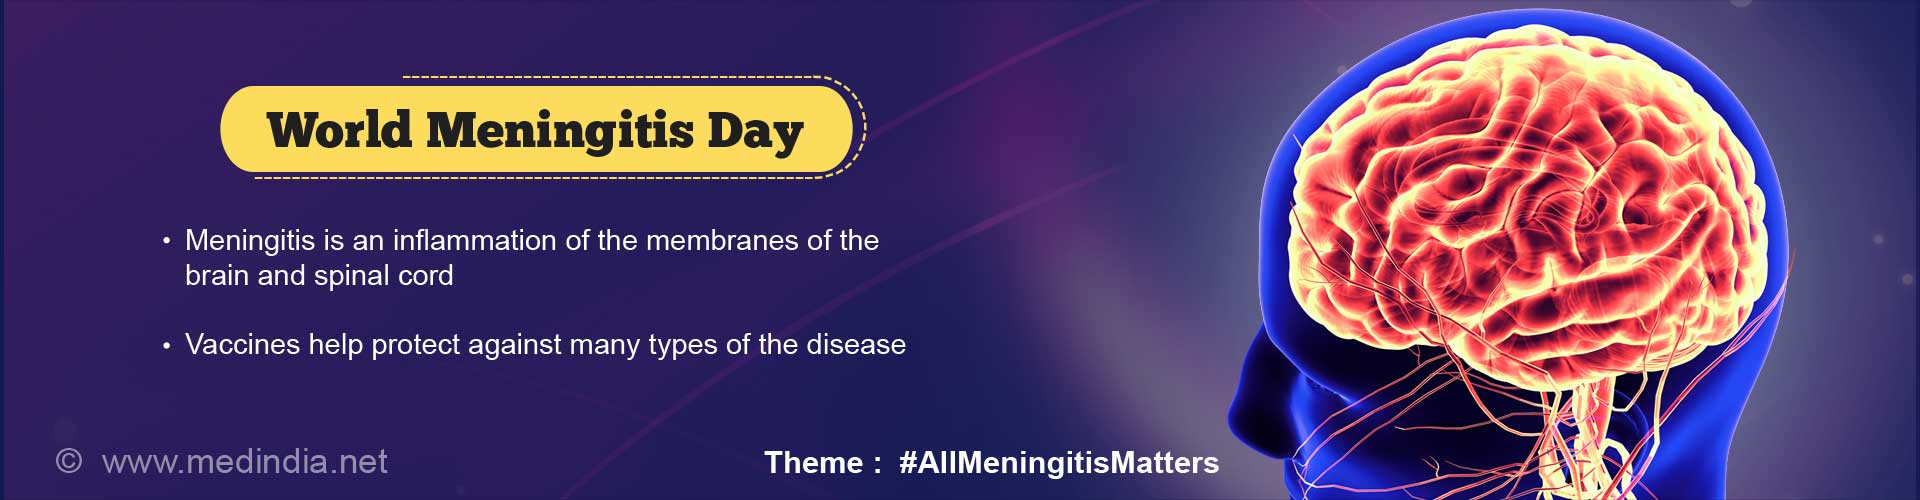 world meningitis day
- meningitis is an inflammation of the membranes of the brain and spinal cord
- vaccines help protect against many types of the disease
Theme: #AllMeningitisMatters